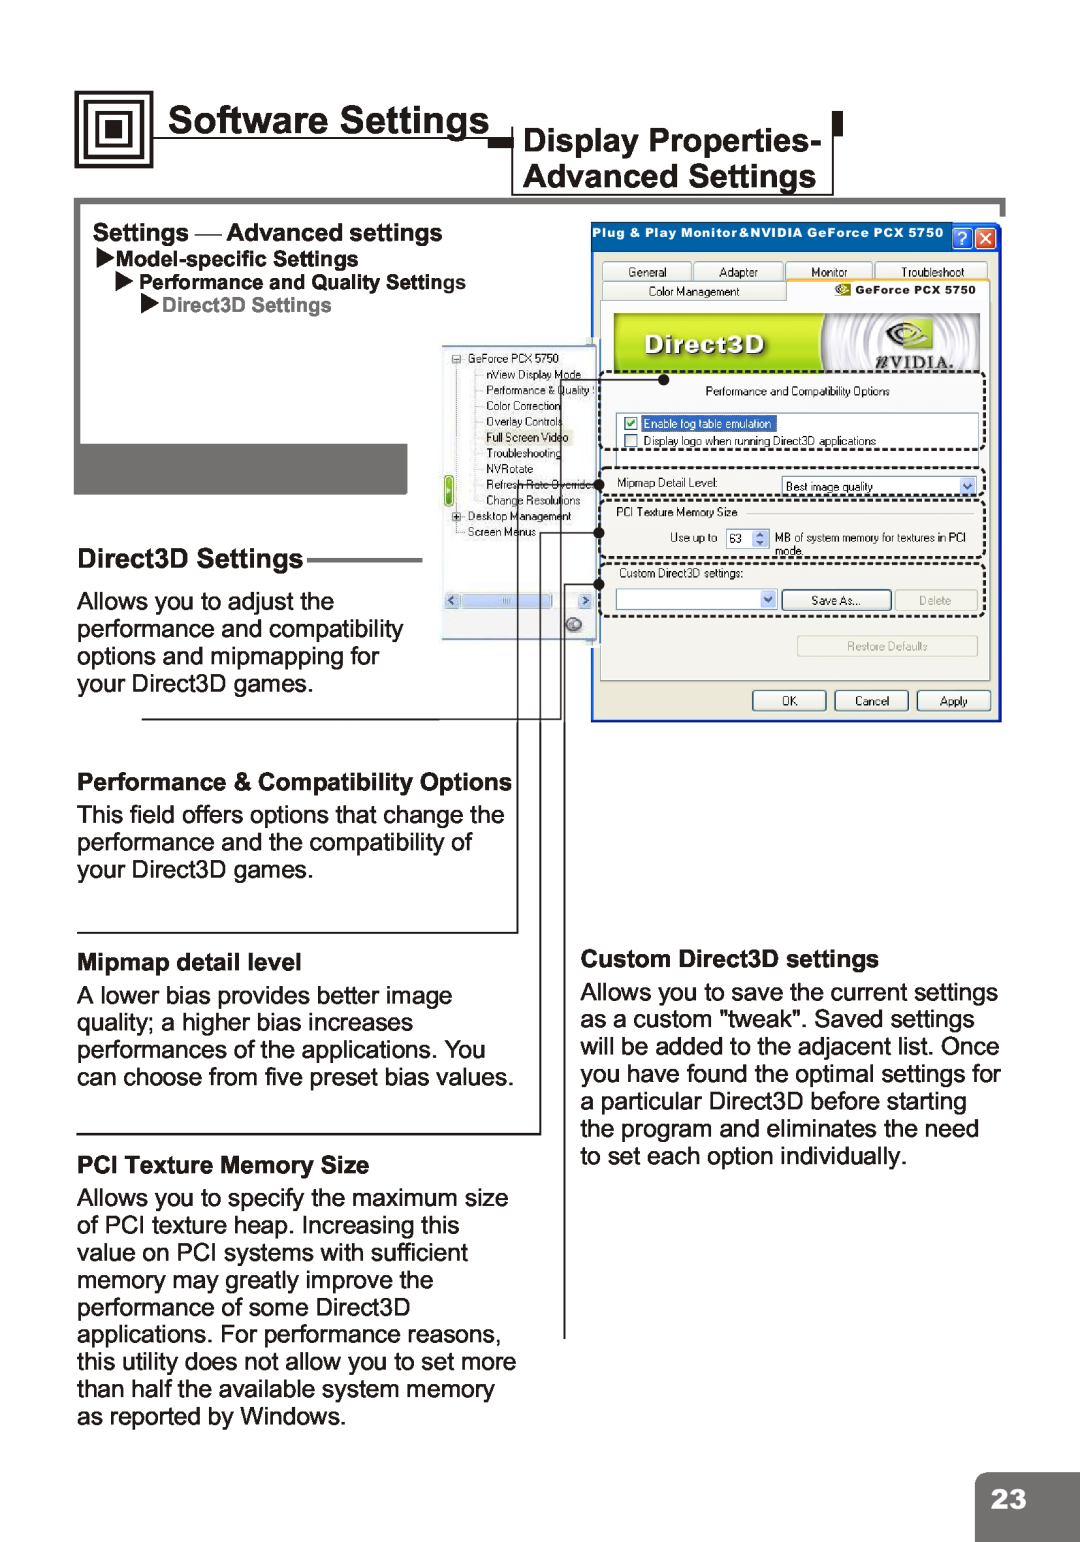 Nvidia PCI Express Series Direct3D Settings, Performance & Compatibility Options, Mipmap detail level, Software Settings 